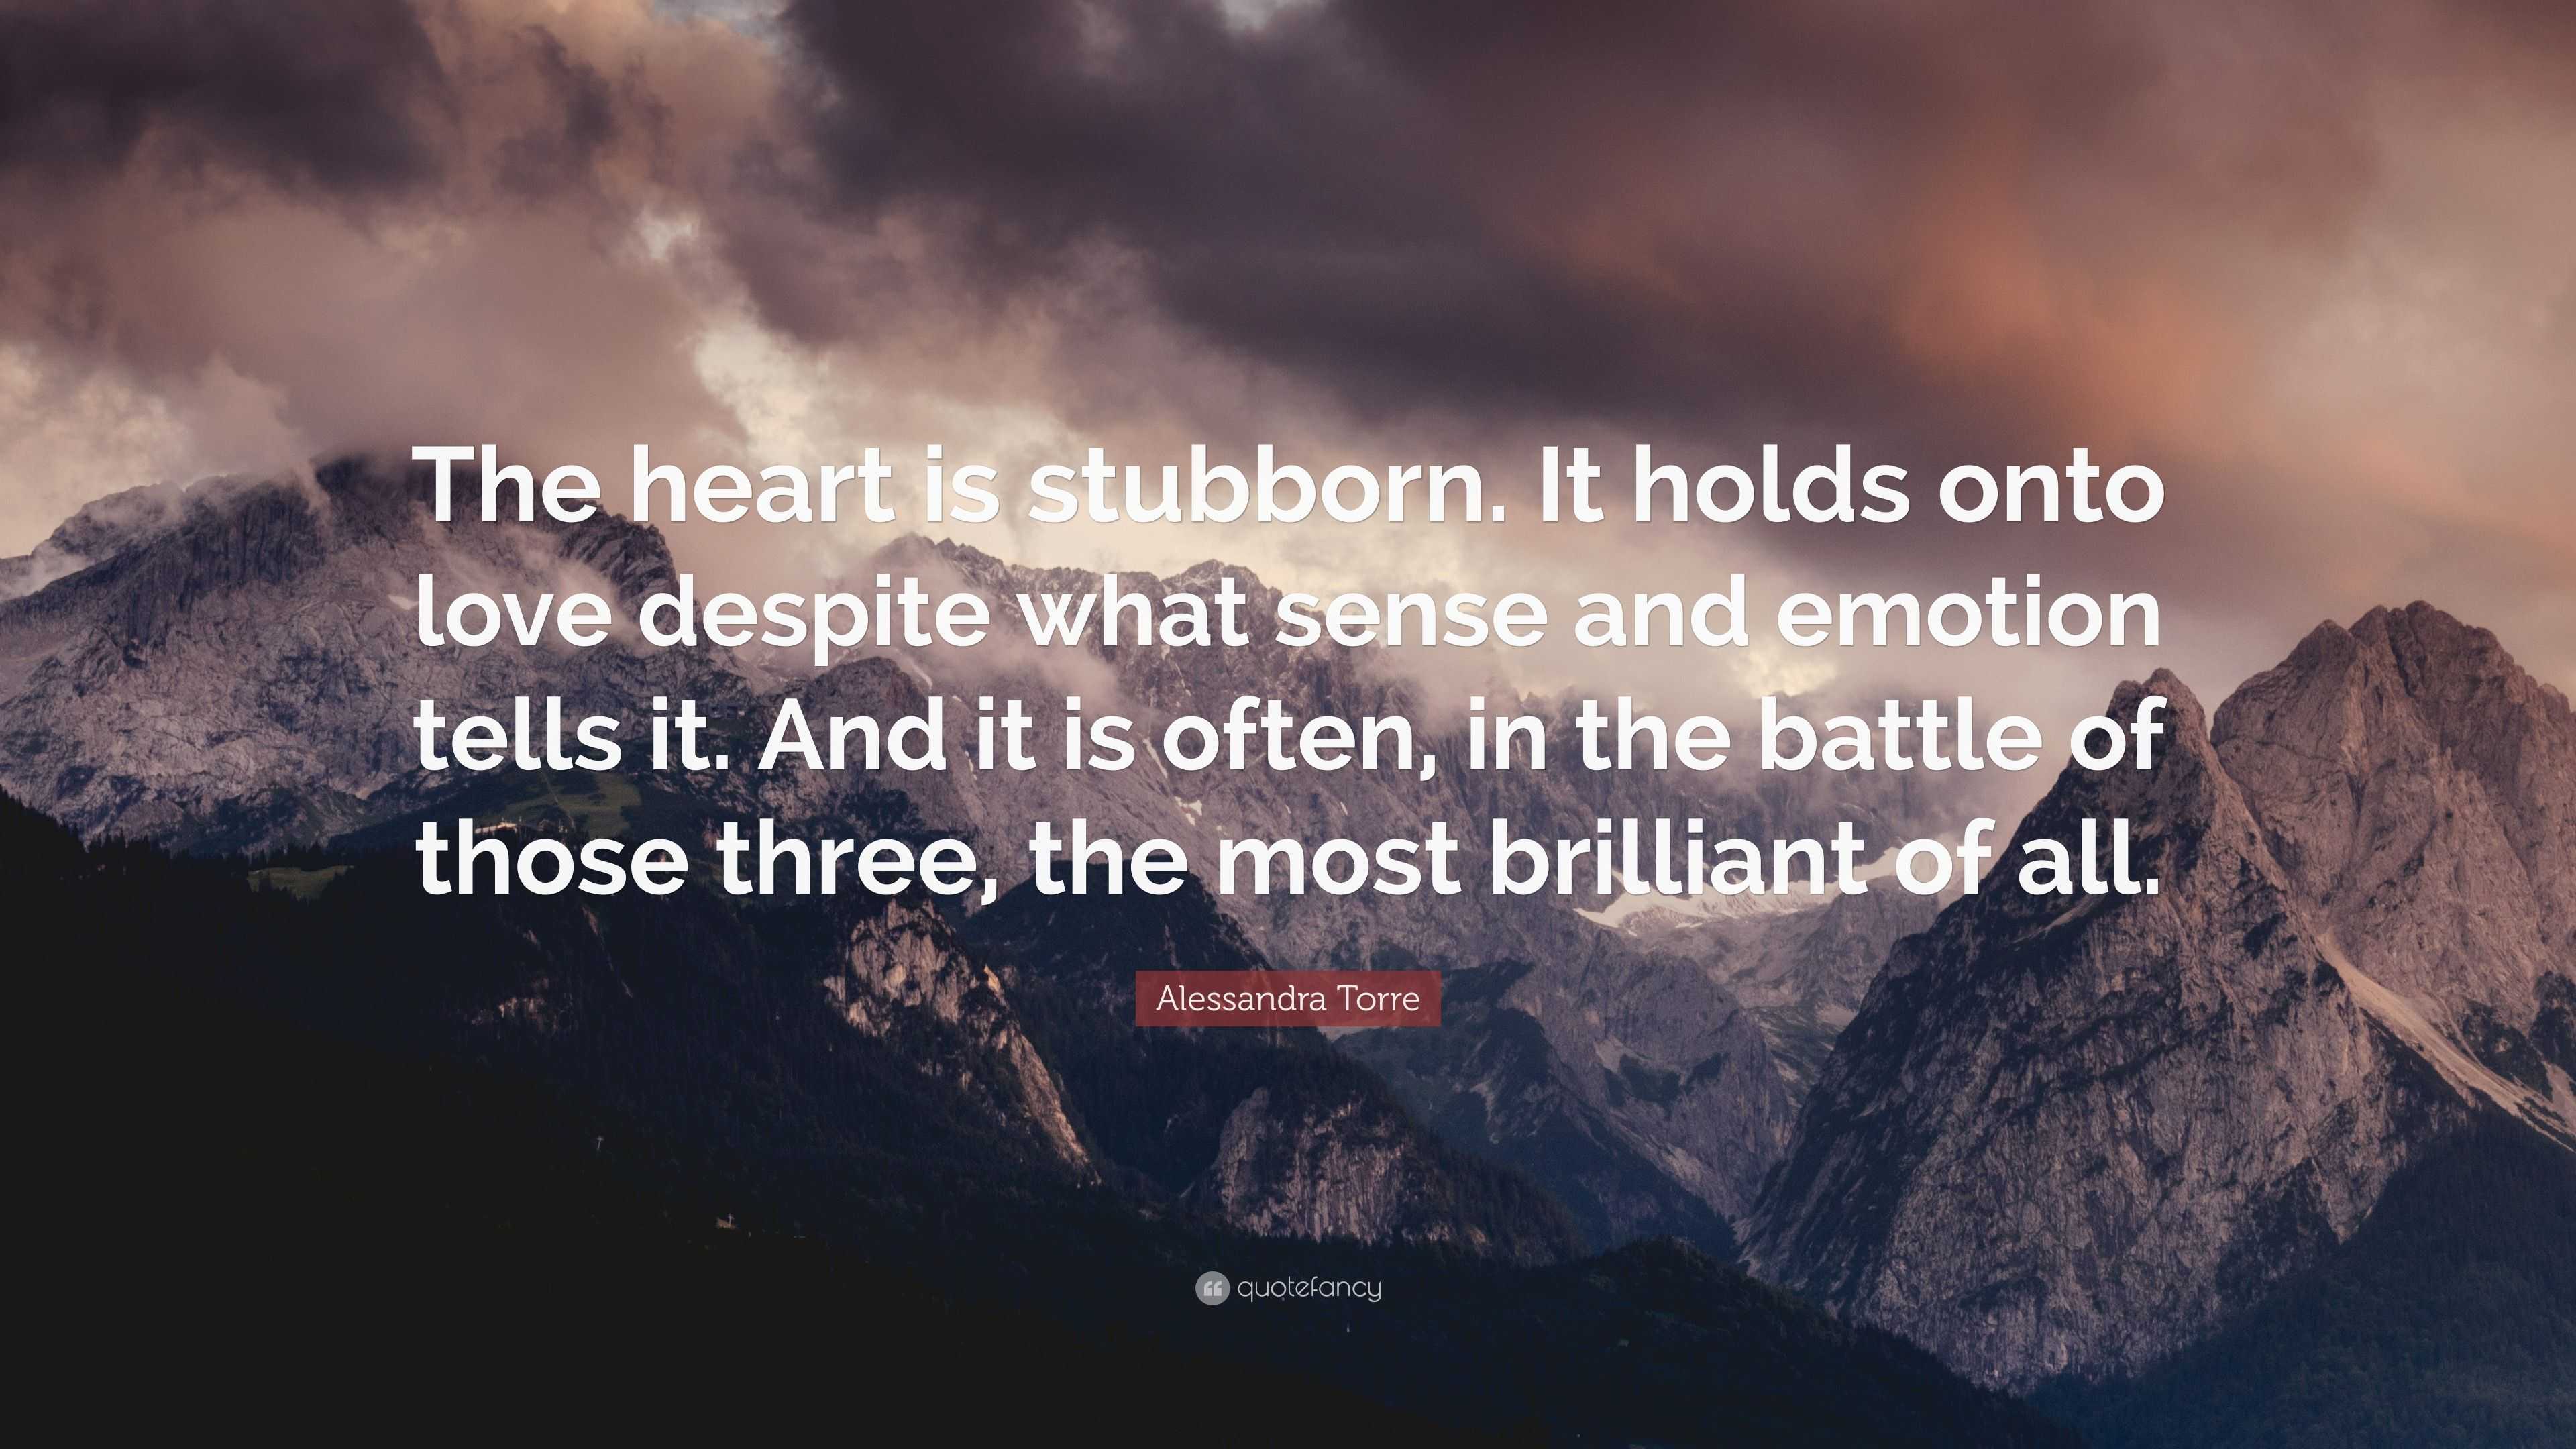 STUBBORN HEART. There are beautiful thoughts within all…